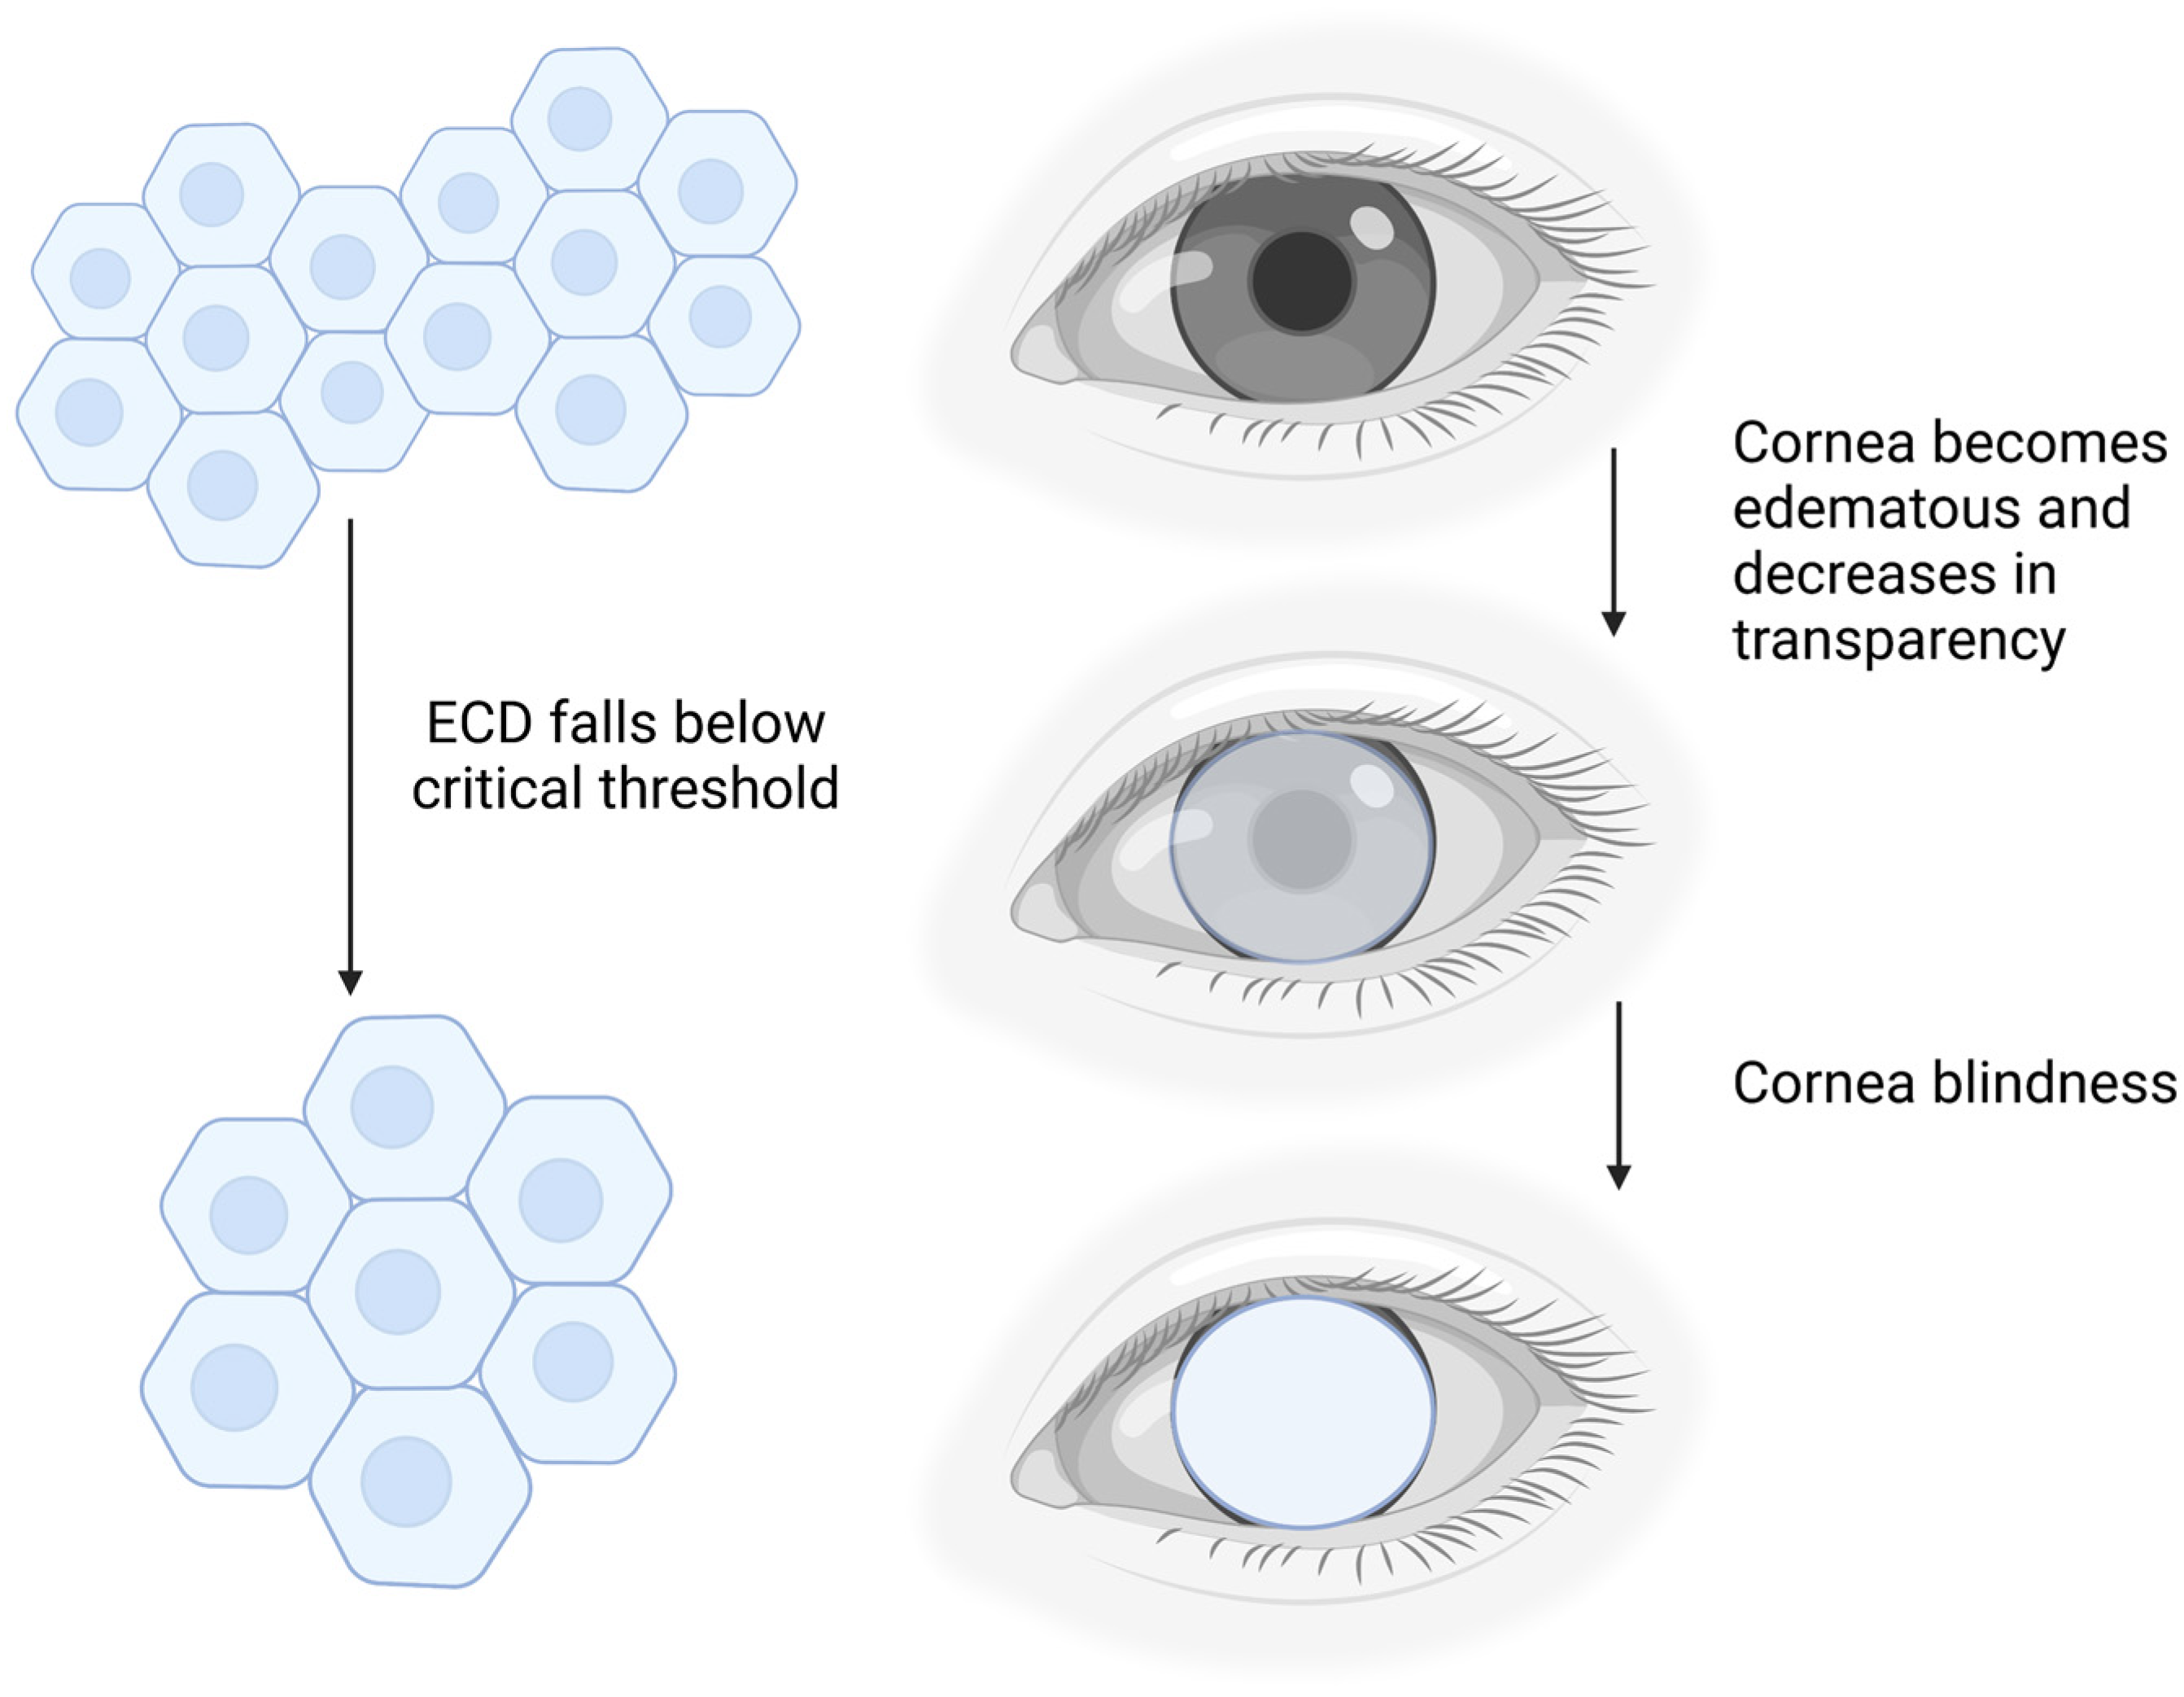 IJMS | Free Full-Text | Corneal Endothelial-like Cells Derived